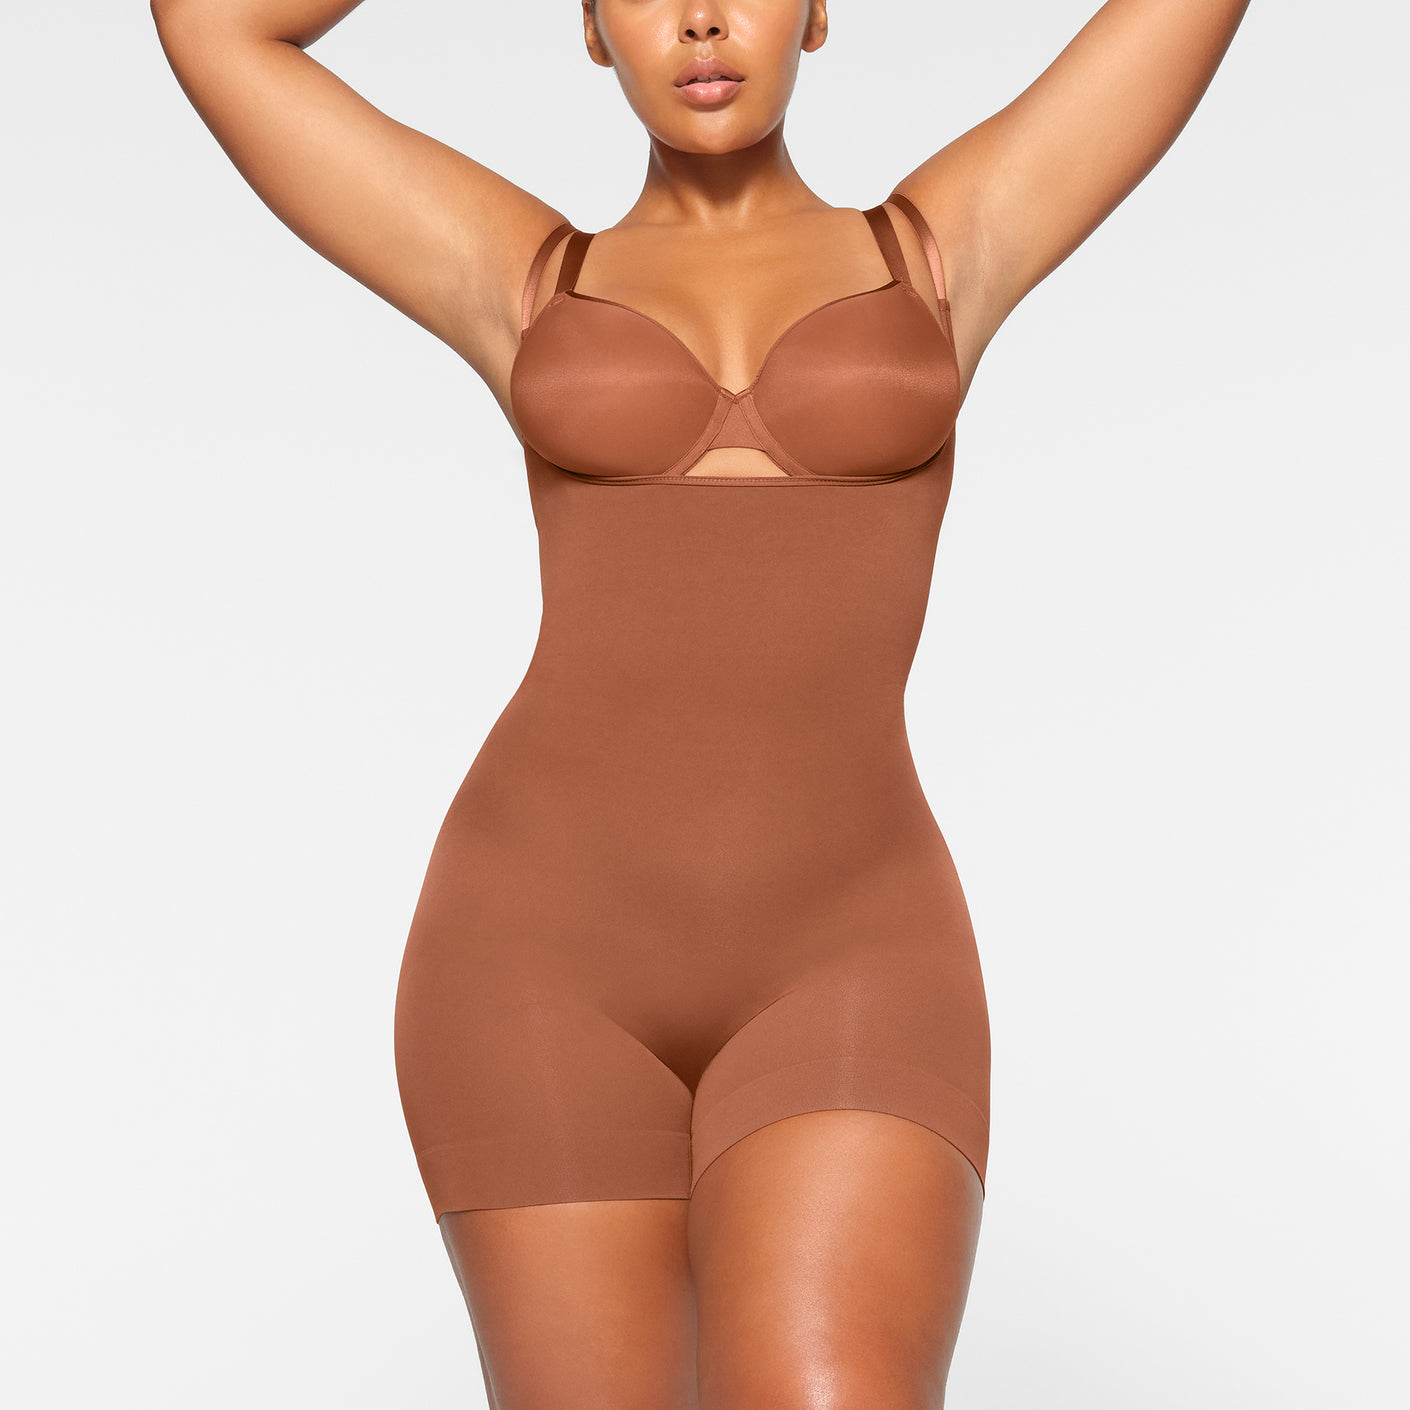 I Saw It First, Seamless Plunge Lingerie Bodysuit